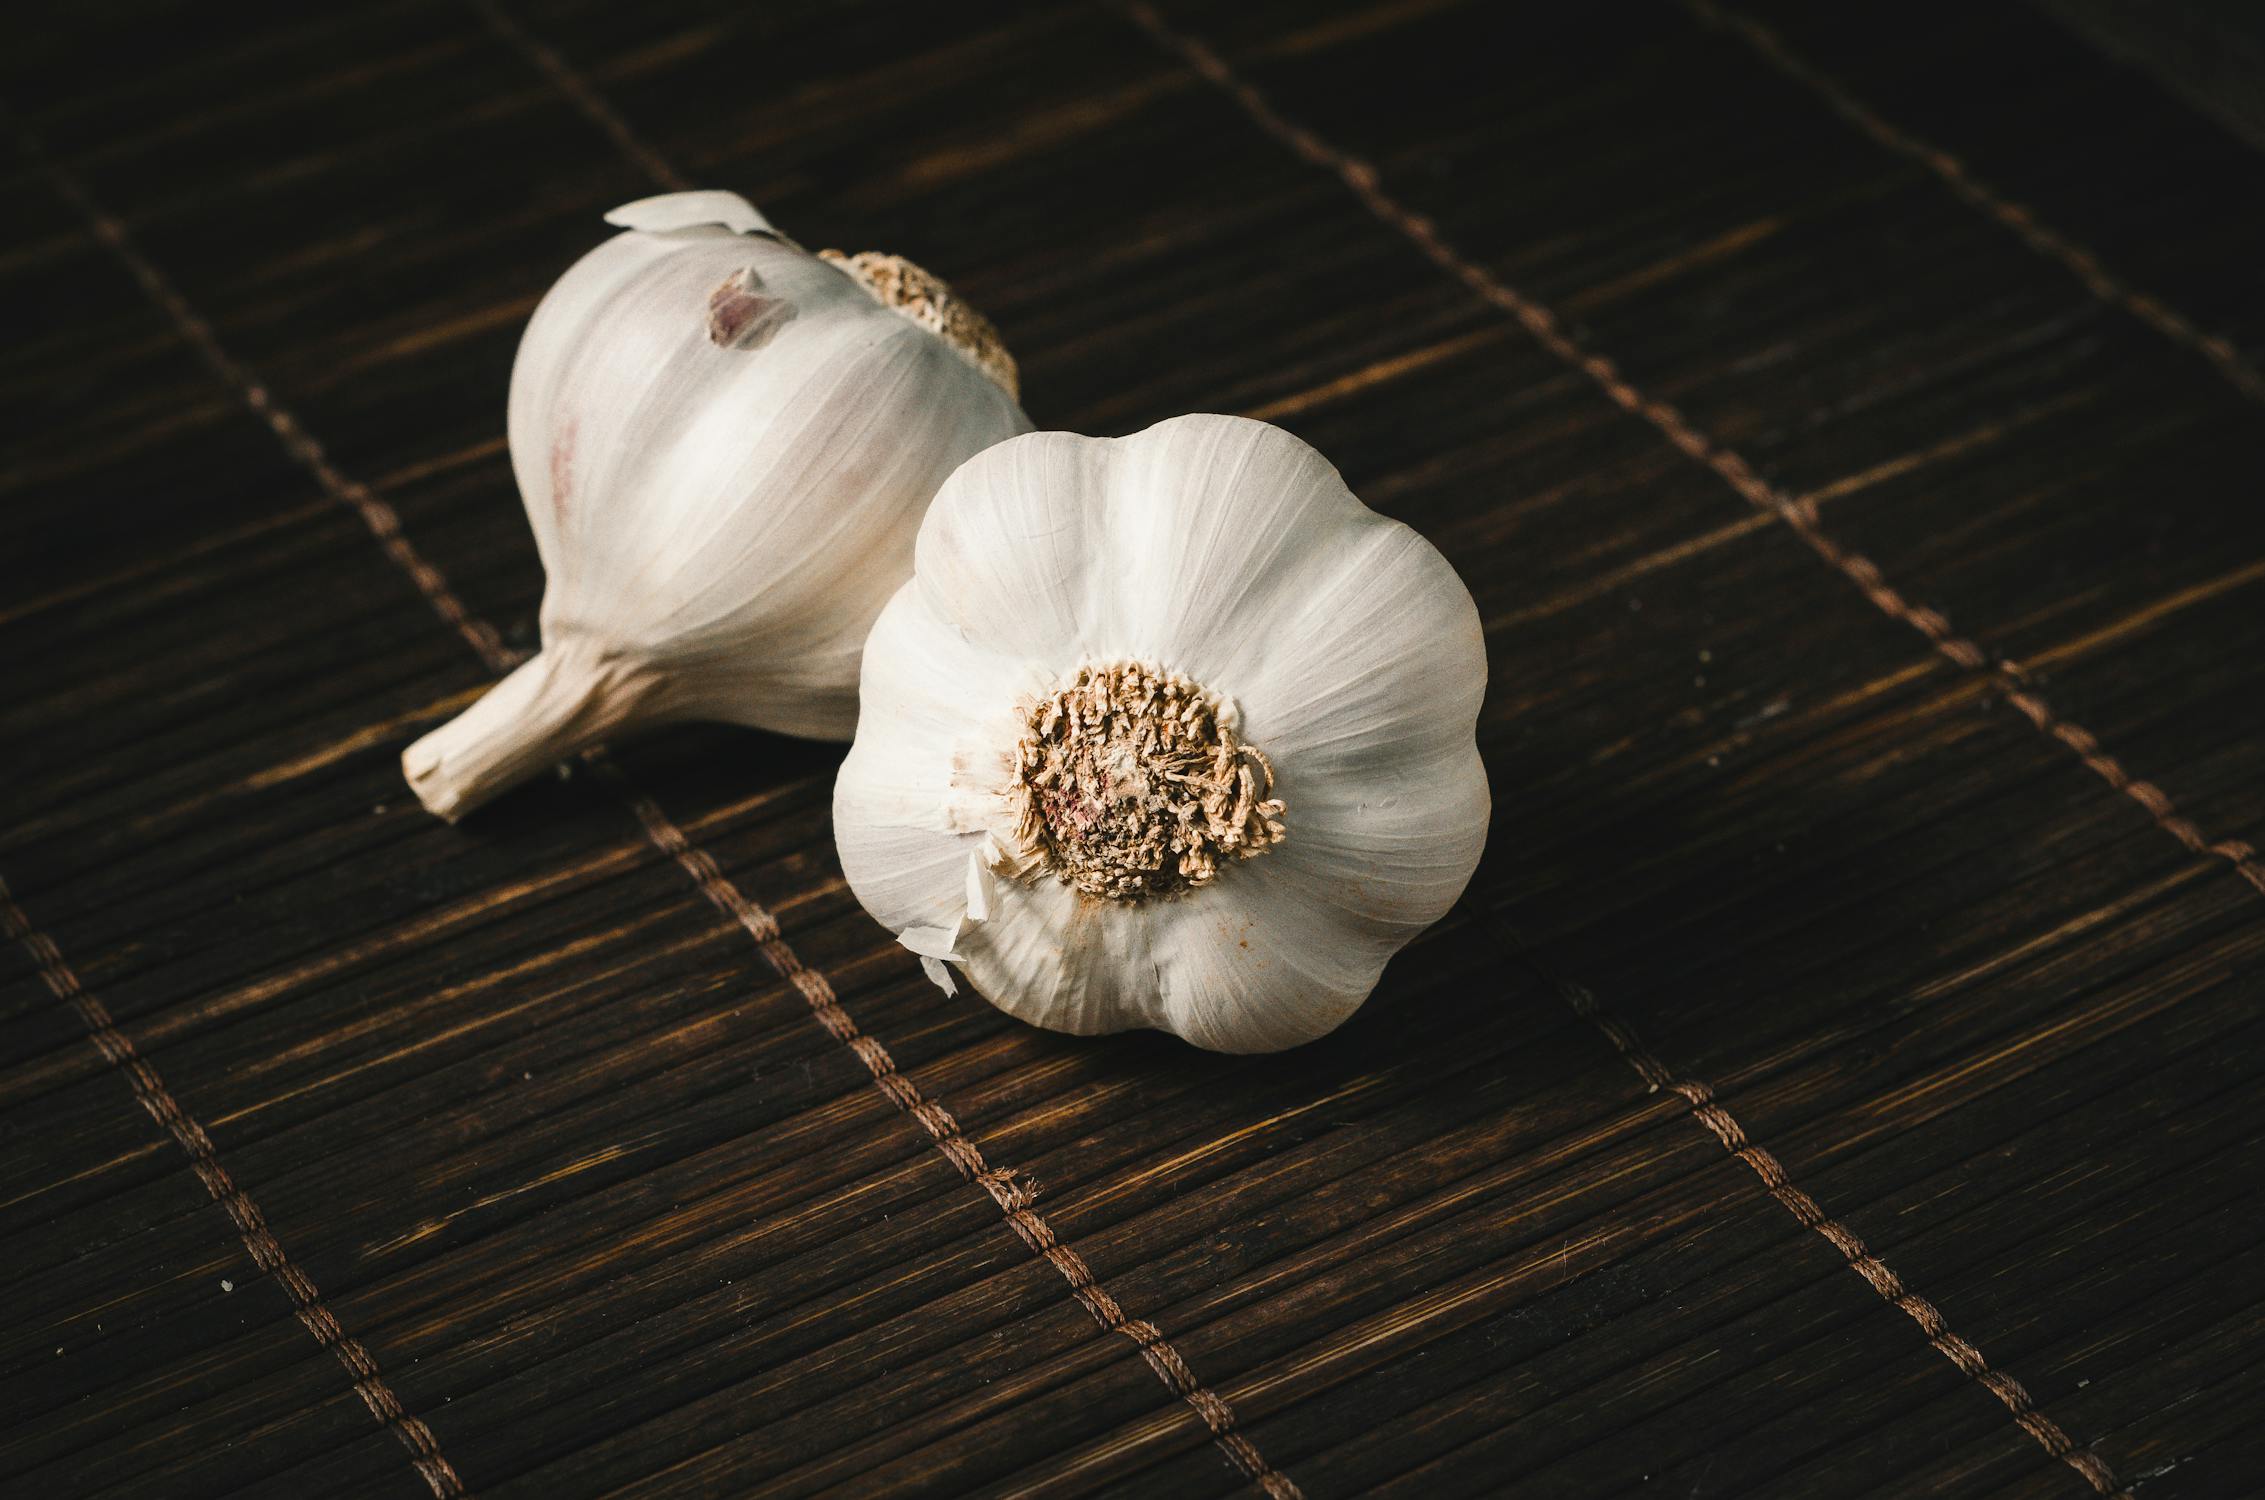 Garlic Photo by Isabella Mendes from Pexels: https://www.pexels.com/photo/two-white-garlics-928251/